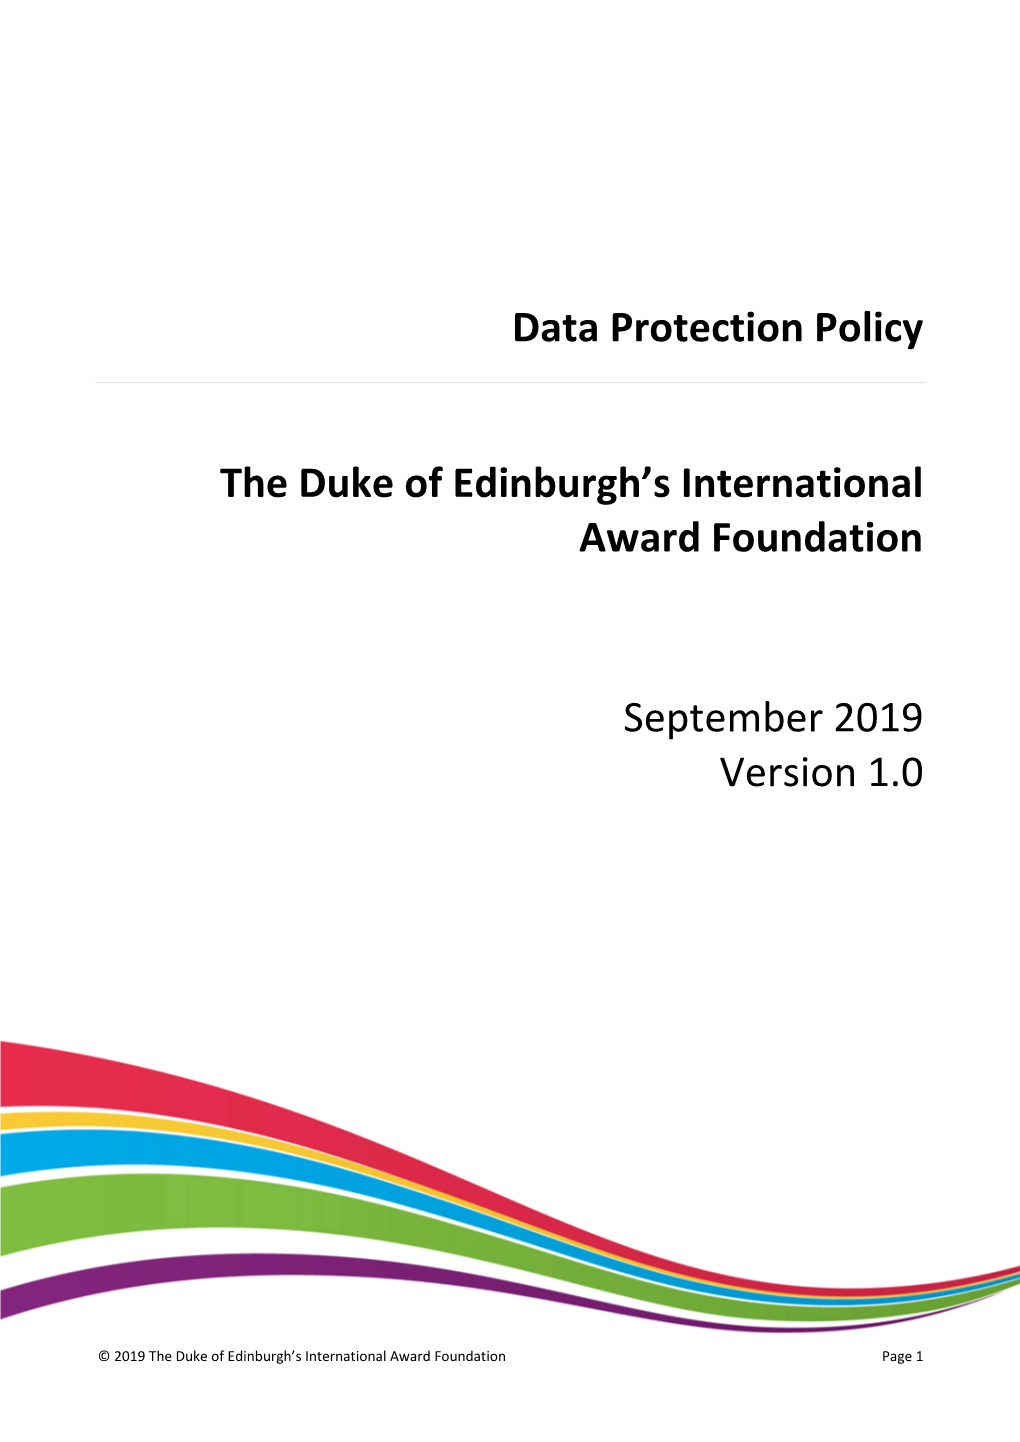 Foundation Data Protection Policy